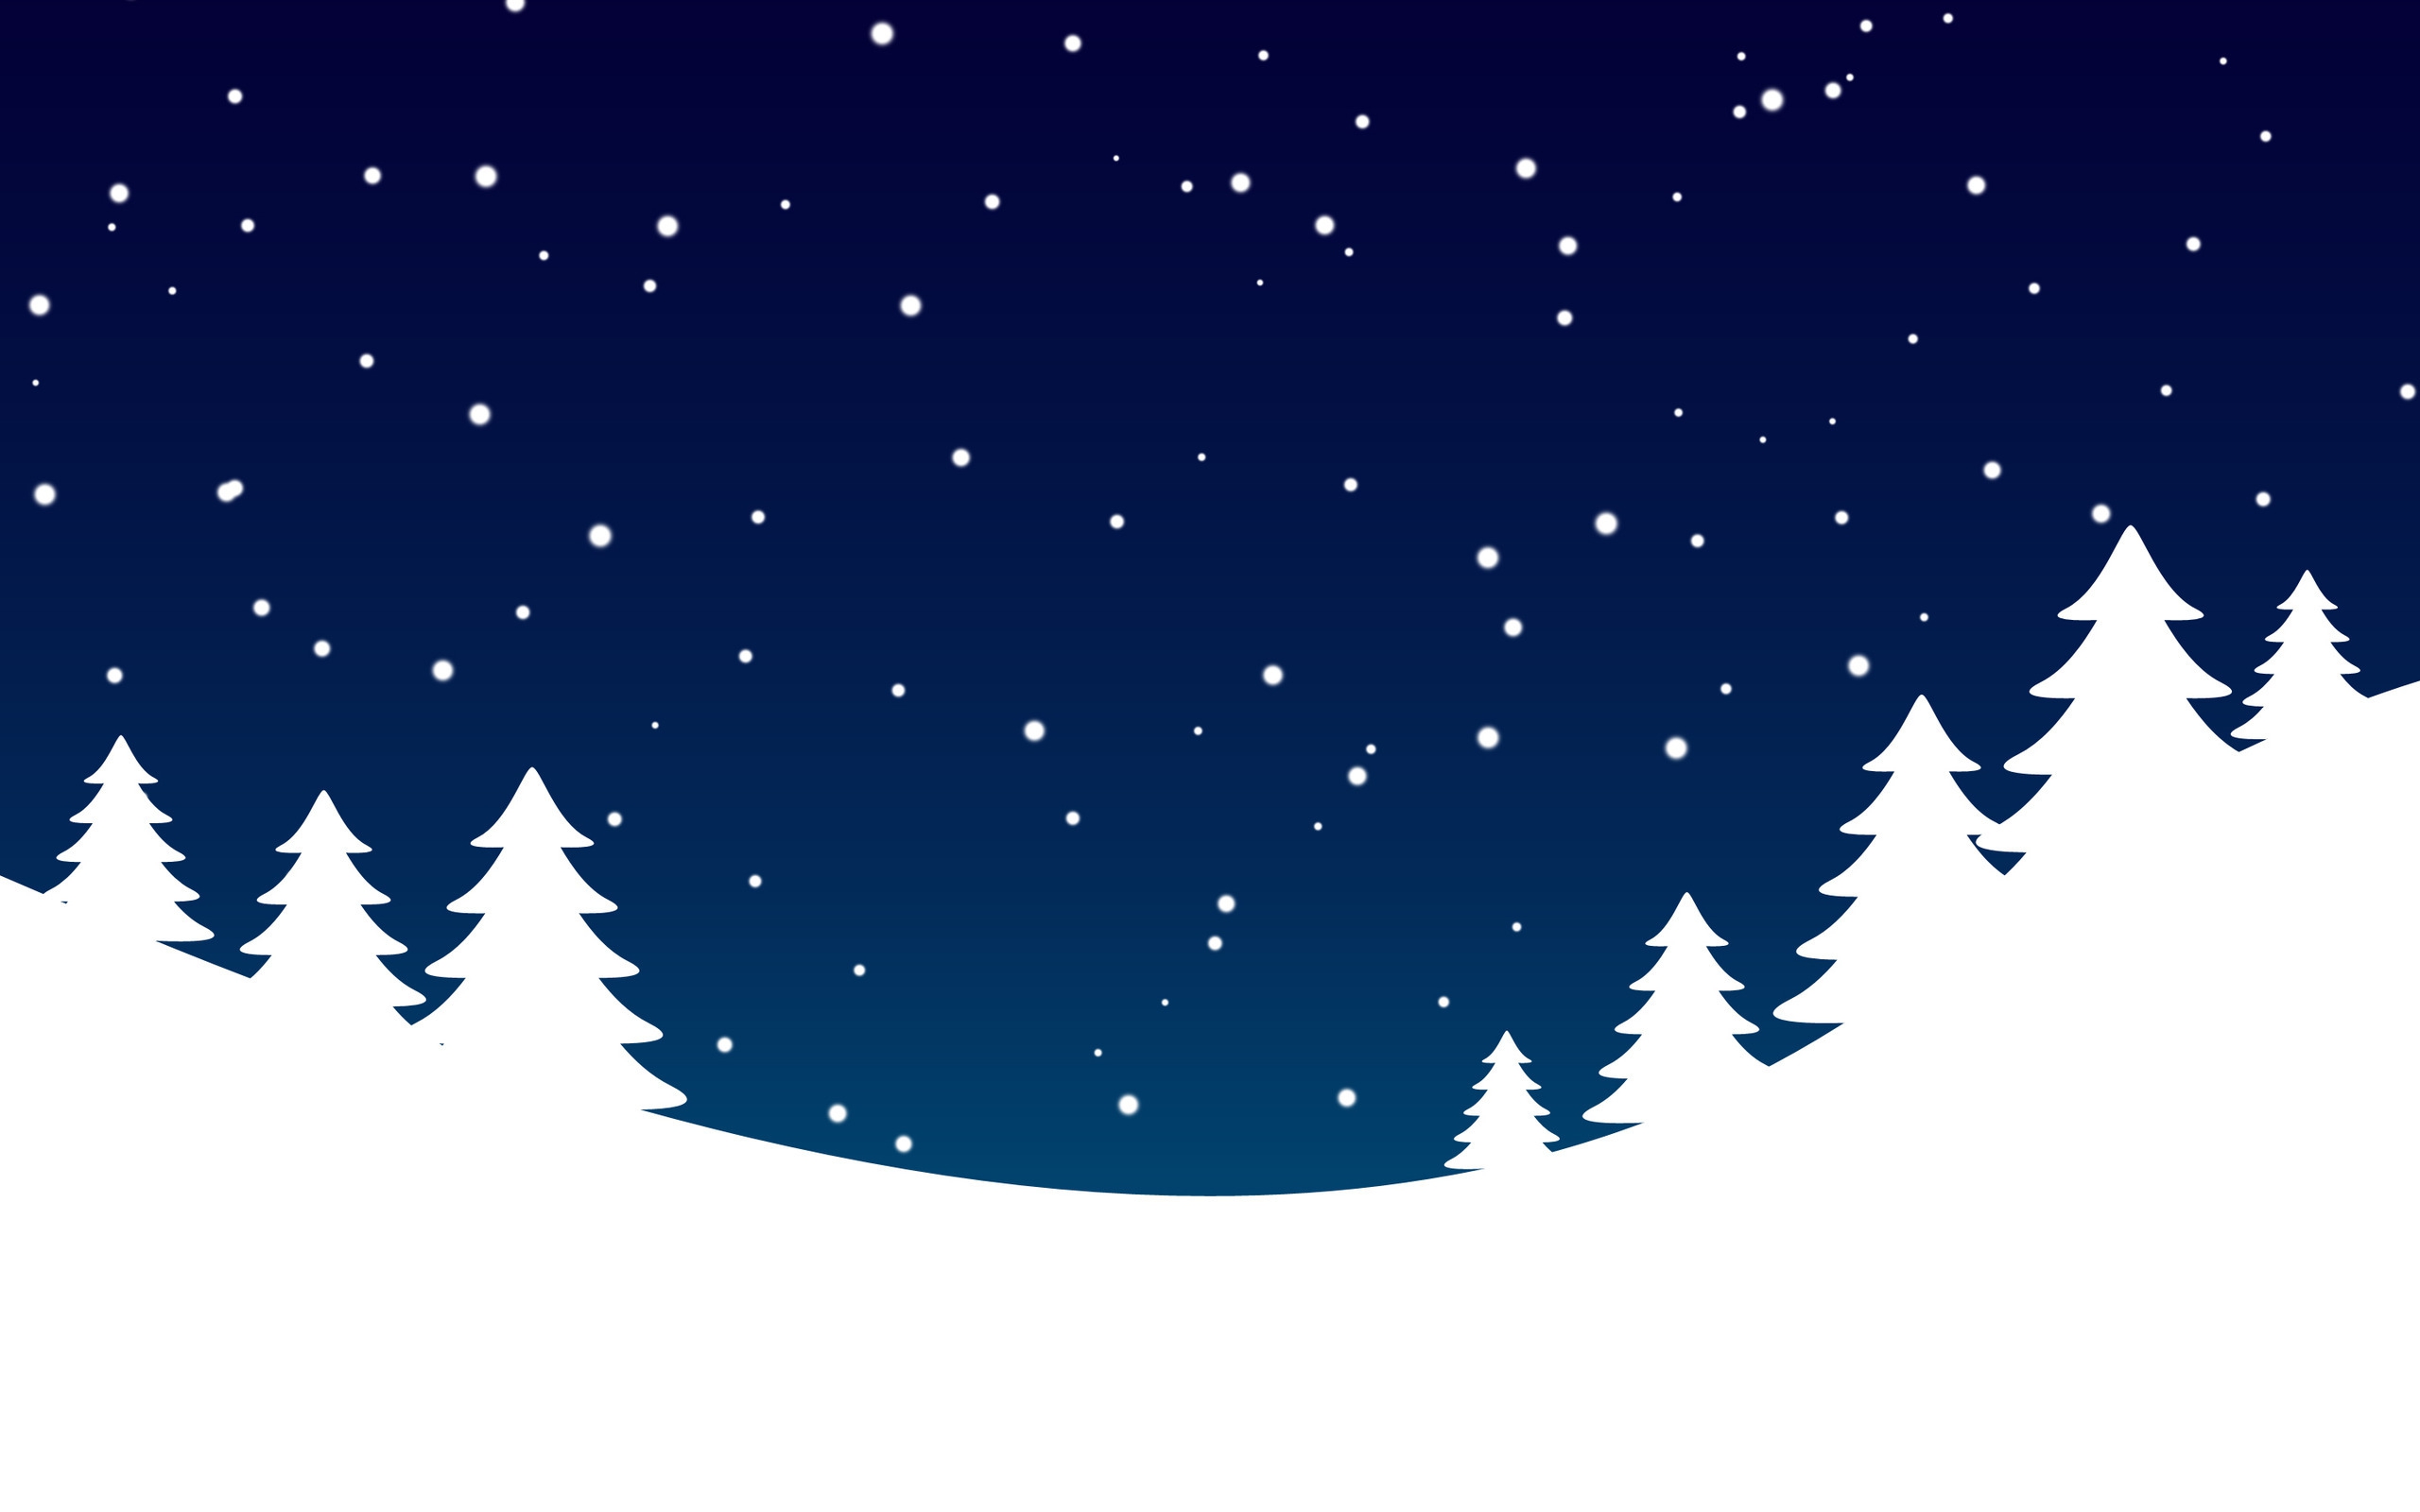 Winter PNG HD Transparent Winter HD.PNG Images. | PlusPNG